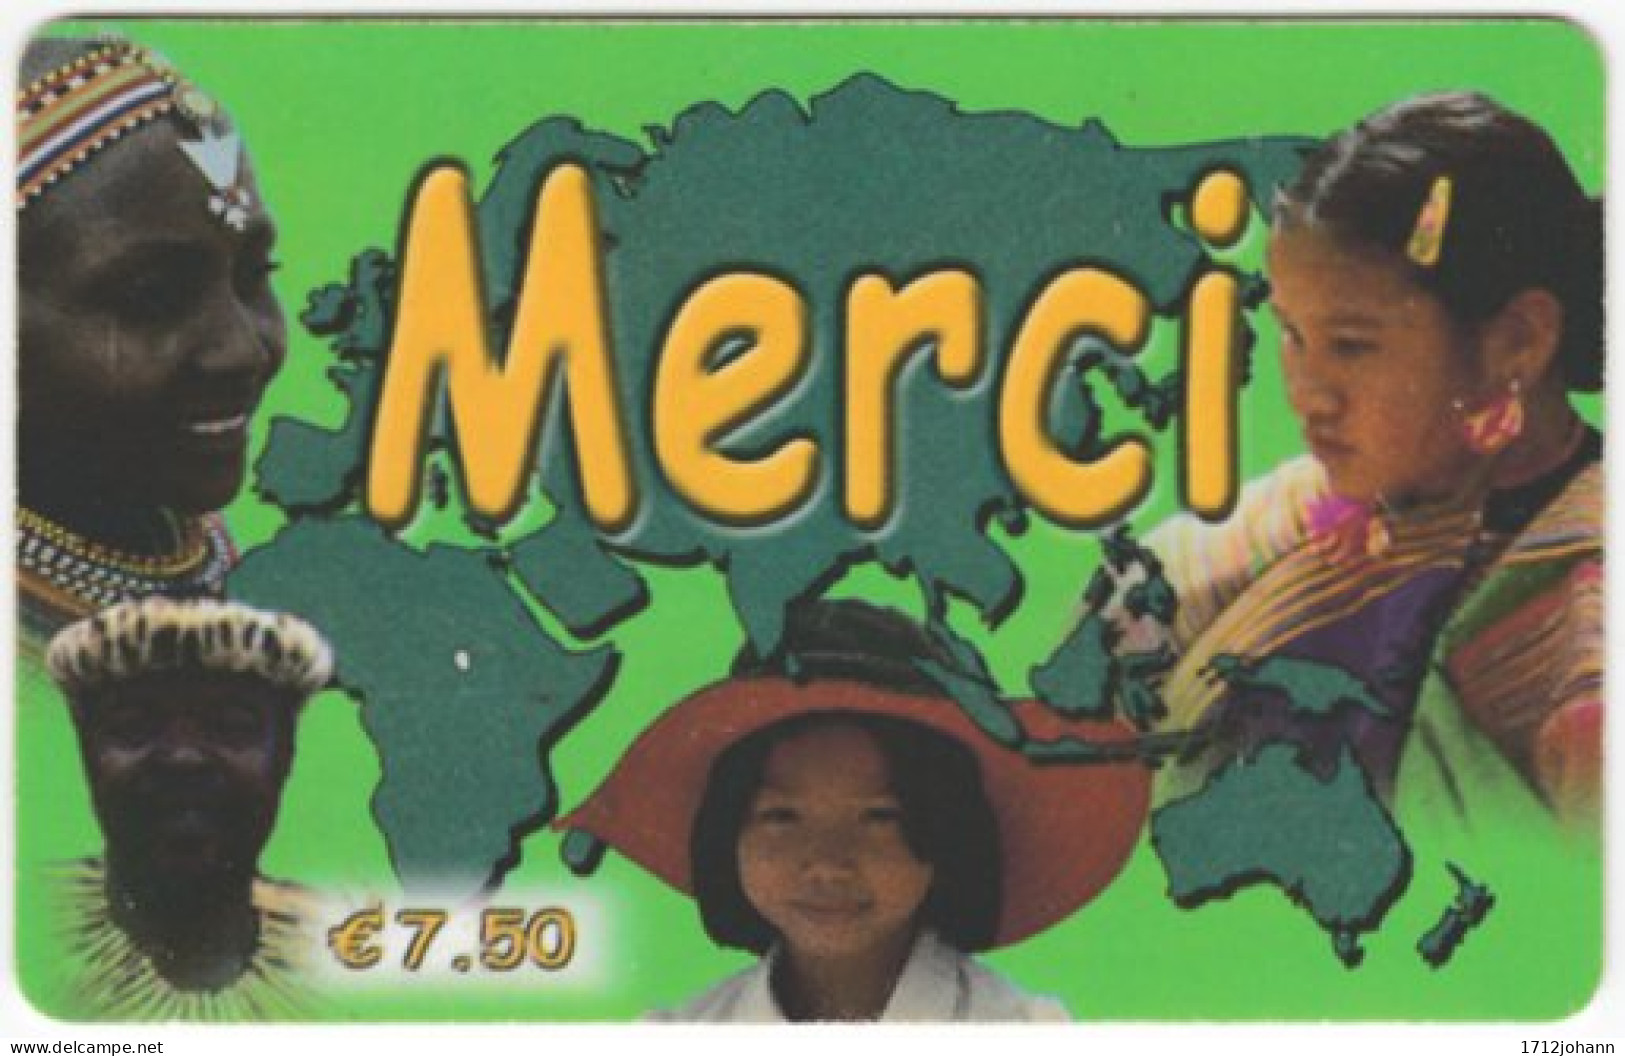 FRANCE C-412 Prepaid Merci - Map, World, People - Used - Mobicartes (recharges)